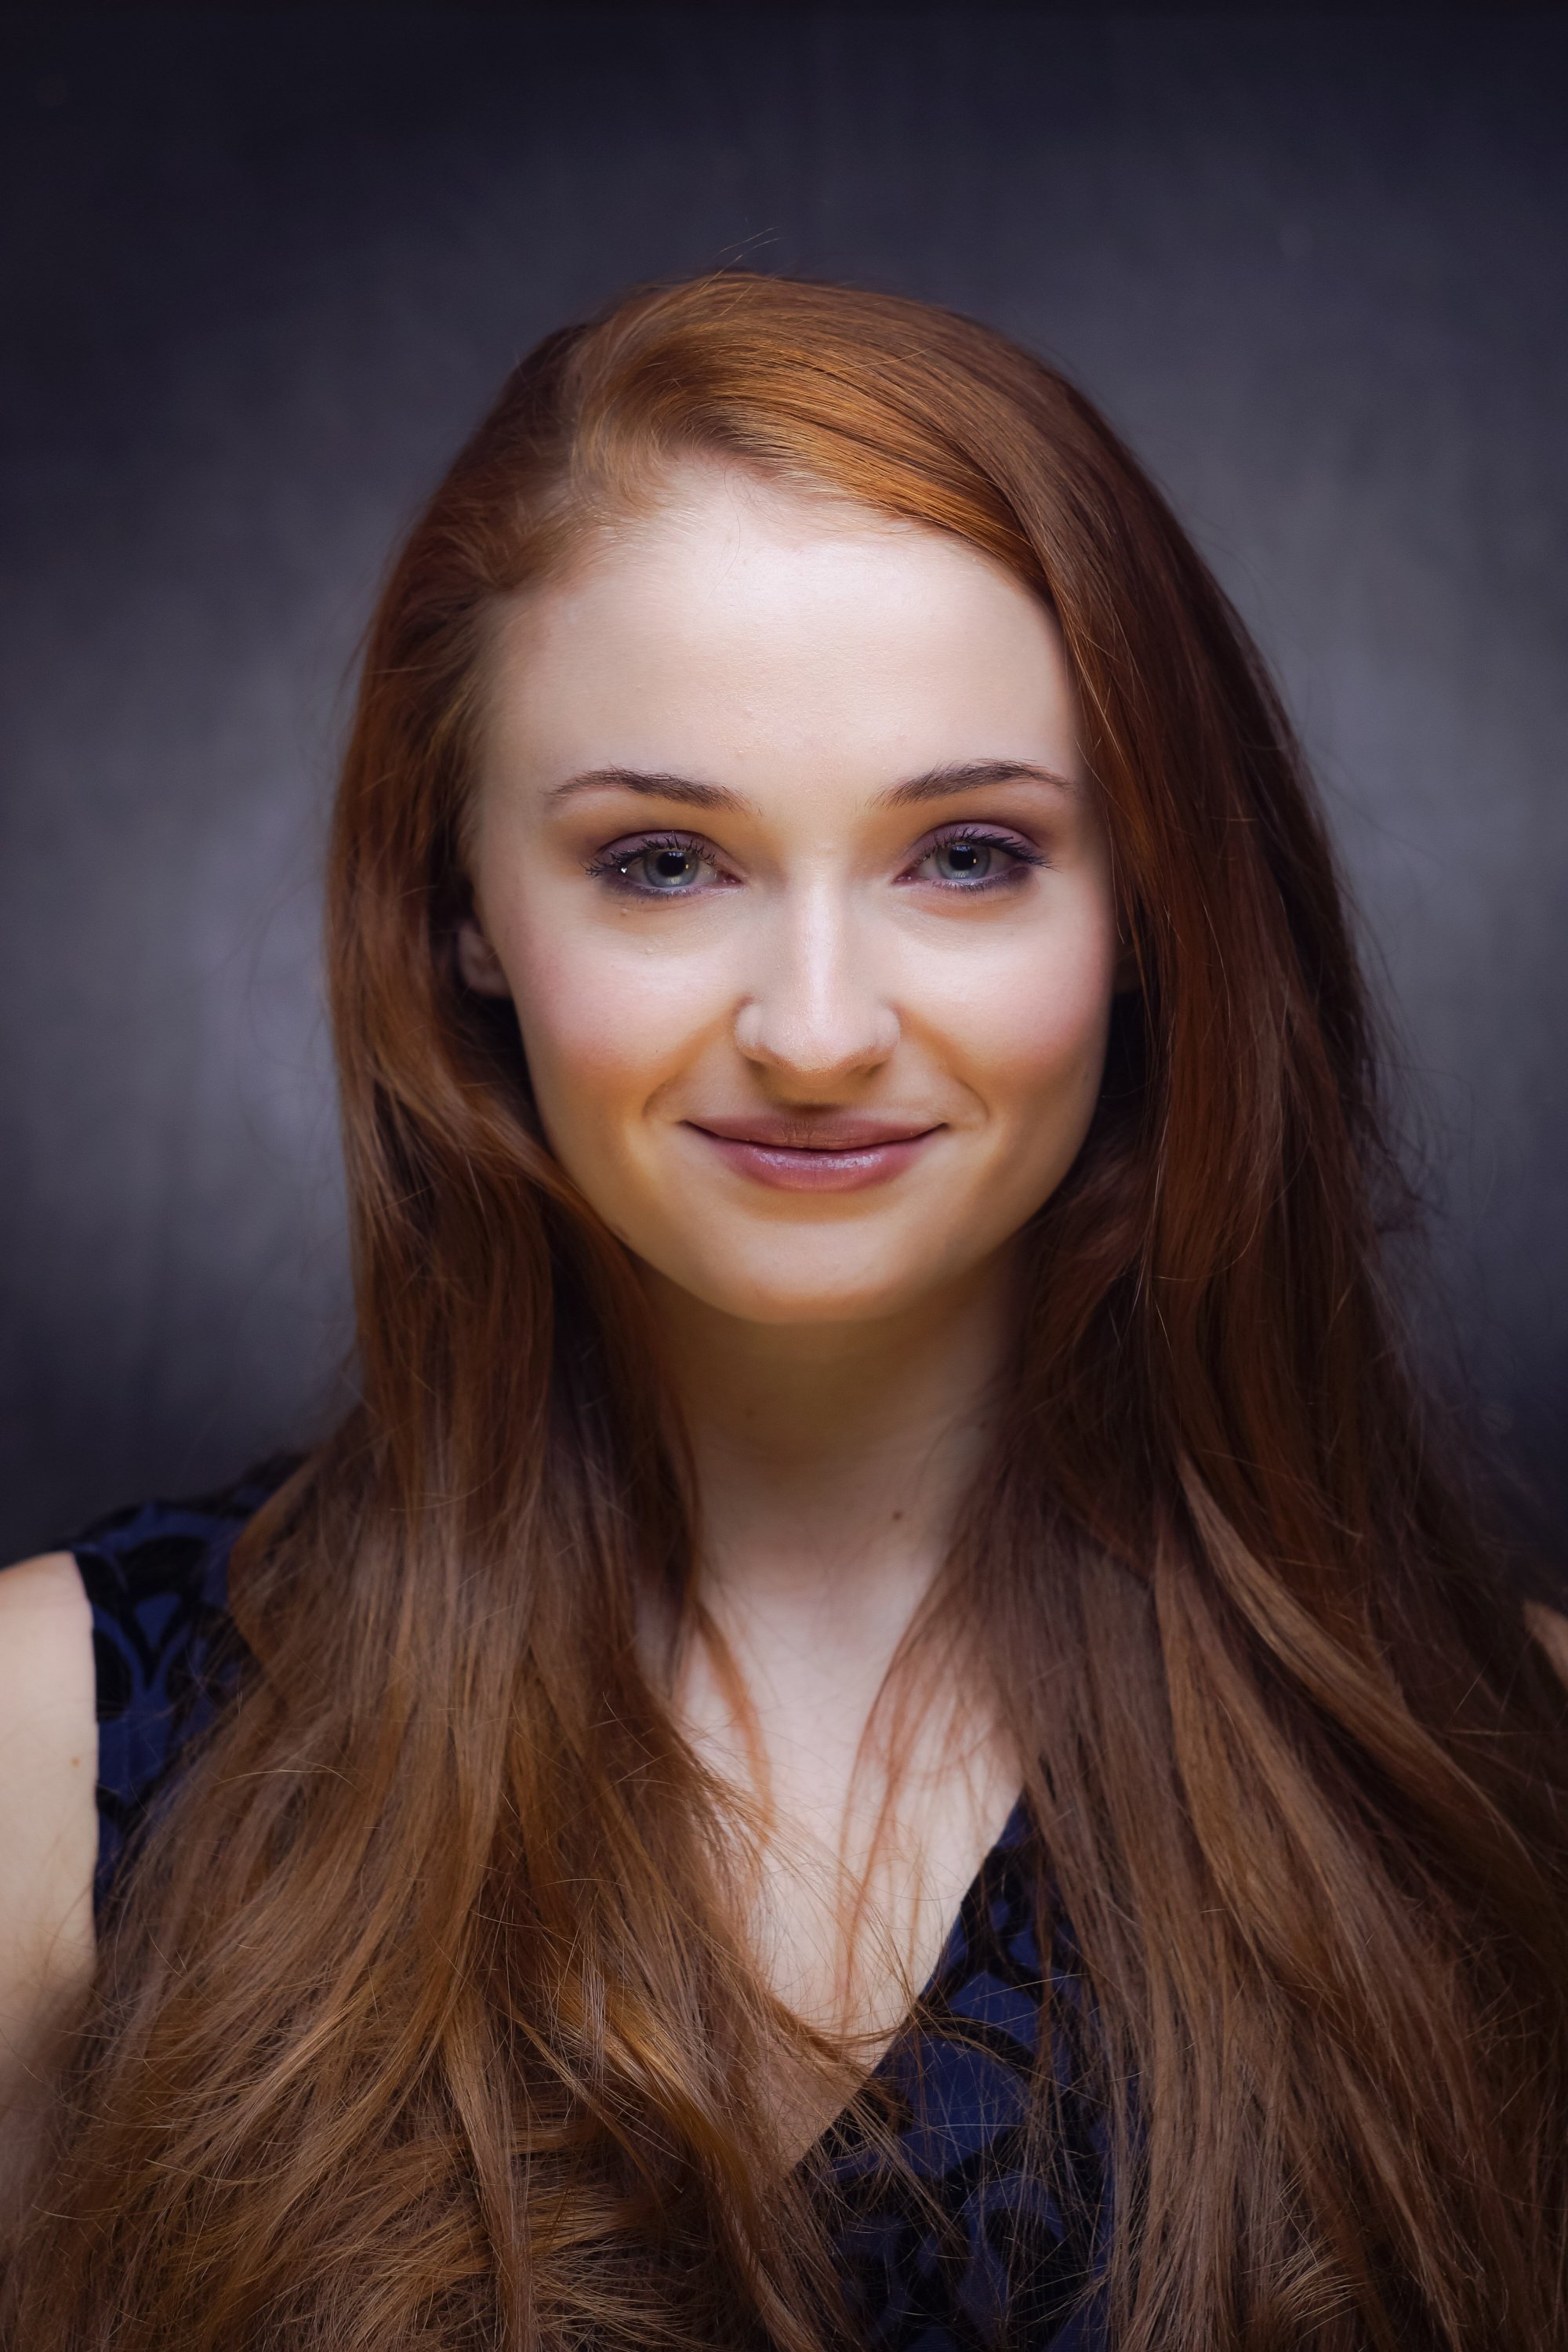 Sophie Turner (actress) photo 318 of 942 pics, wallpaper - photo #738708 - ThePlace22000 x 3000